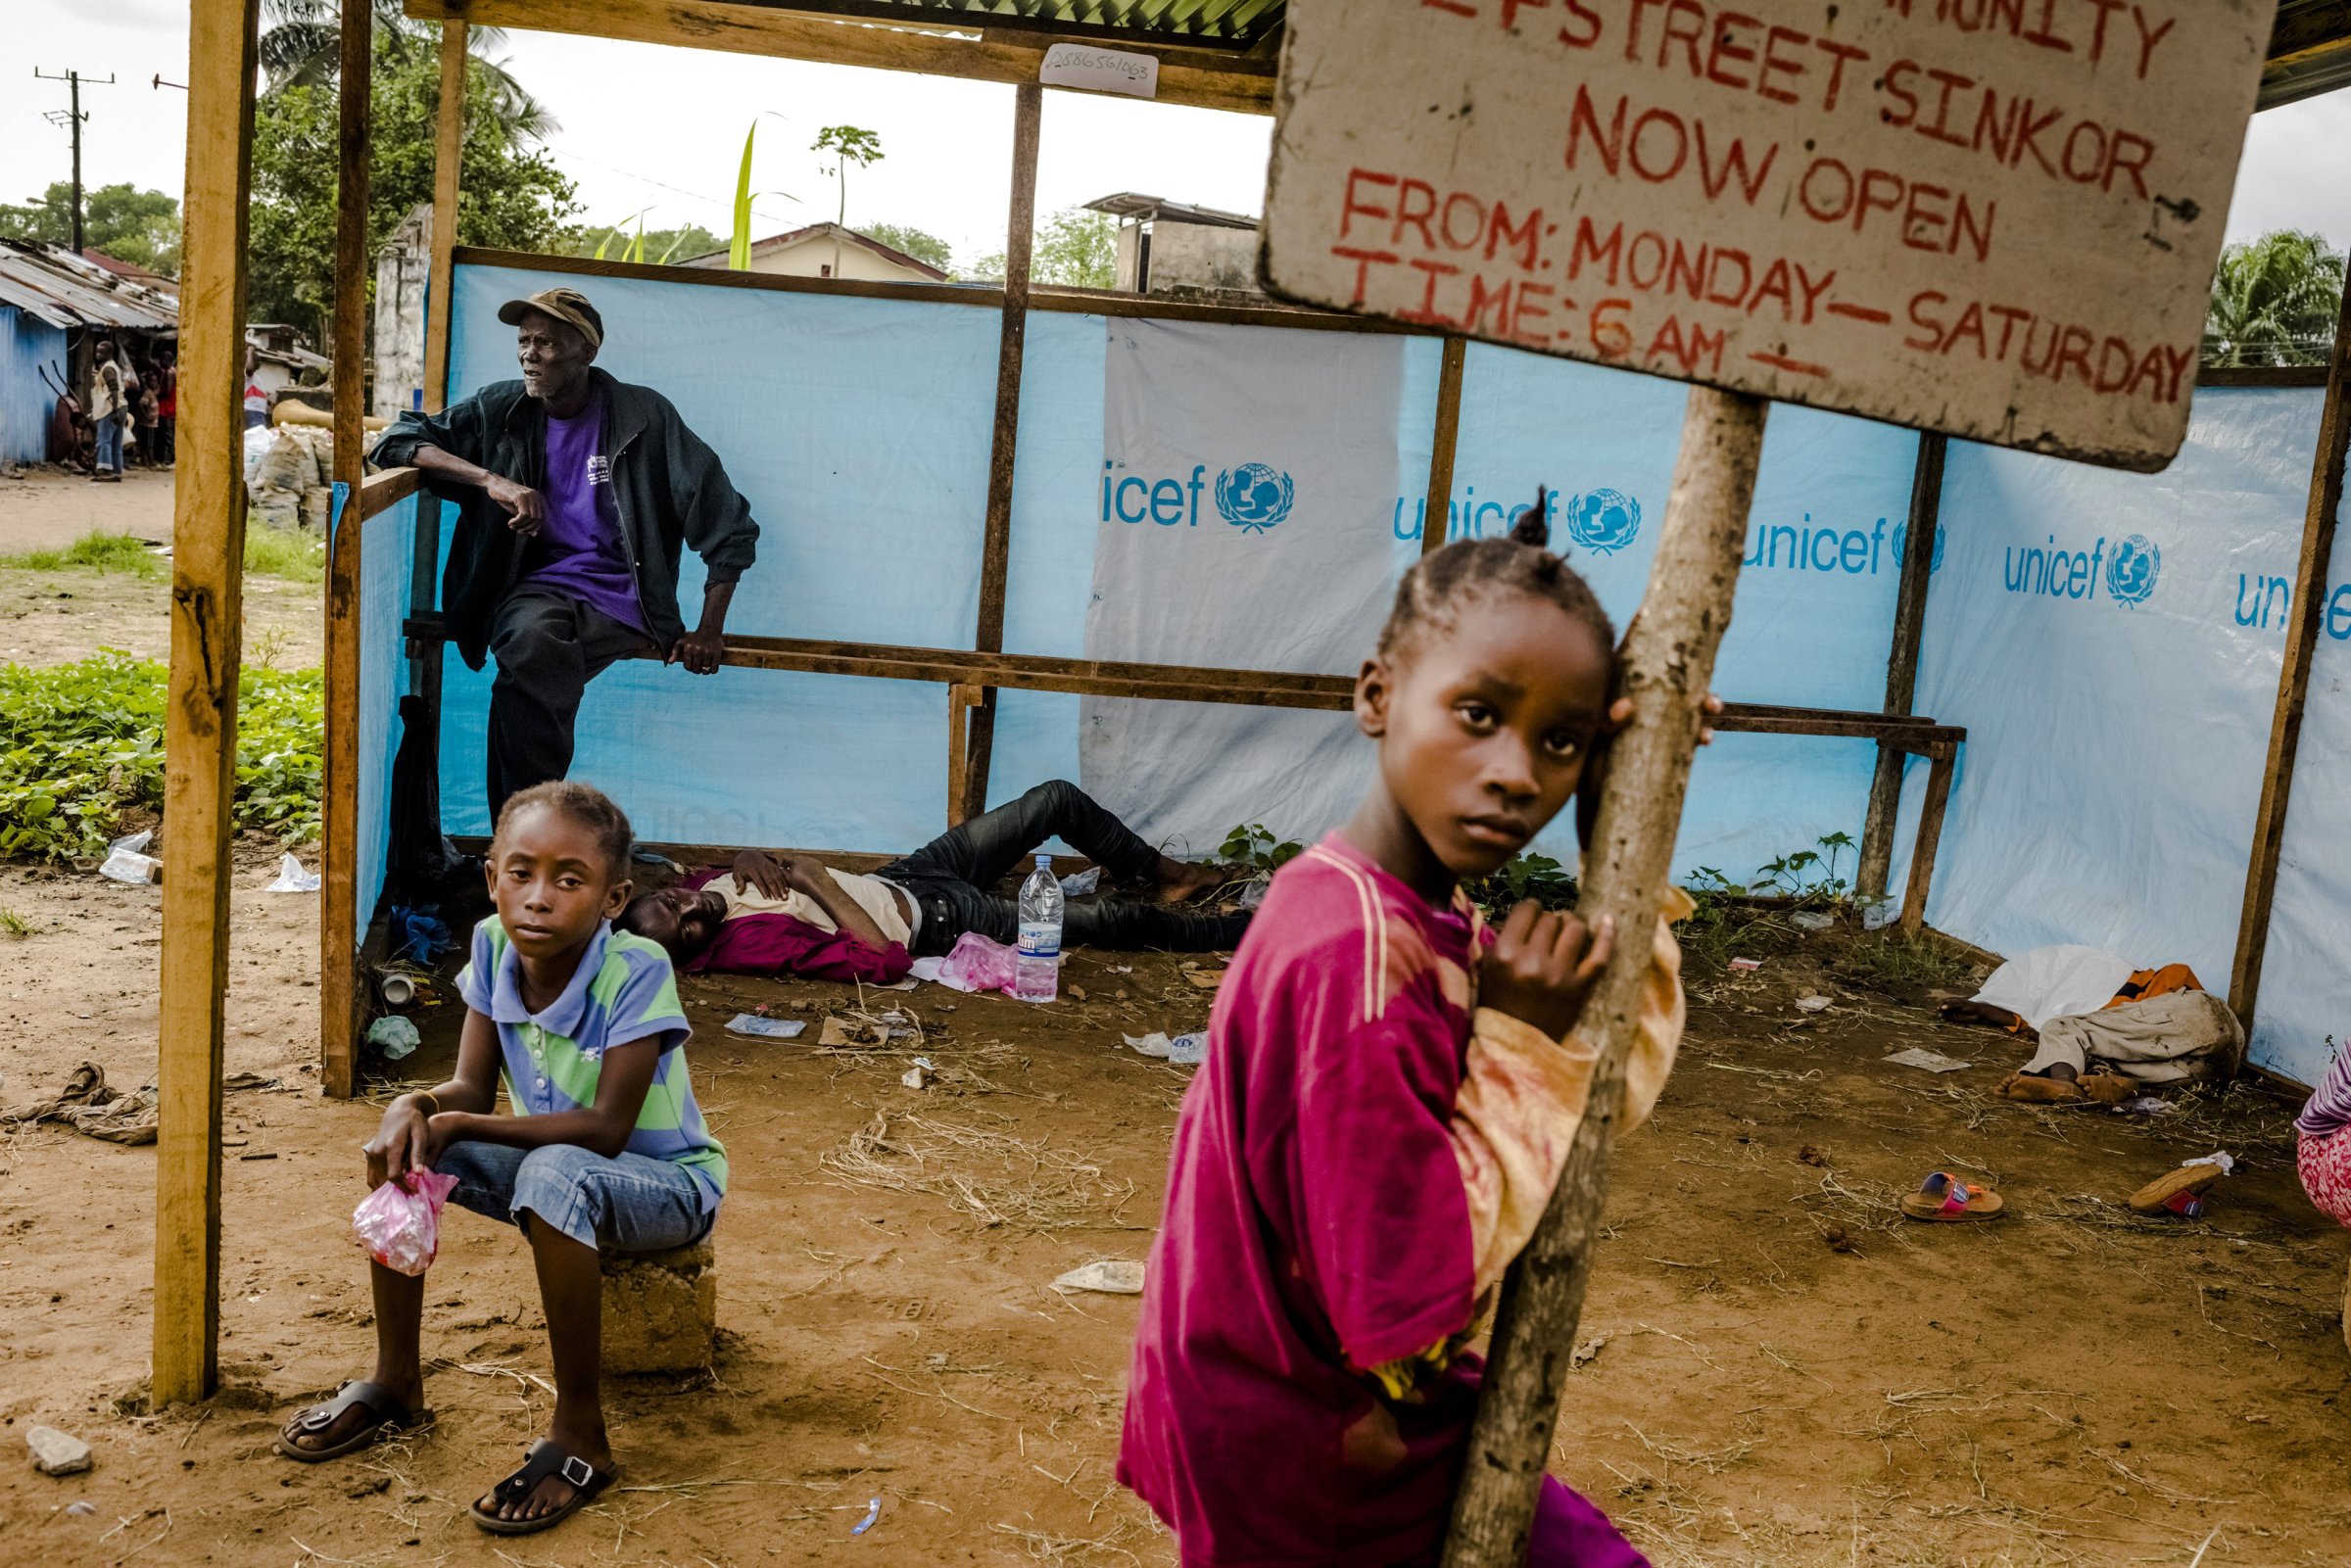 People wait to be admitted into an Ebola treatment facility in Monrovia, Liberia, on Sept. 5, 2014.